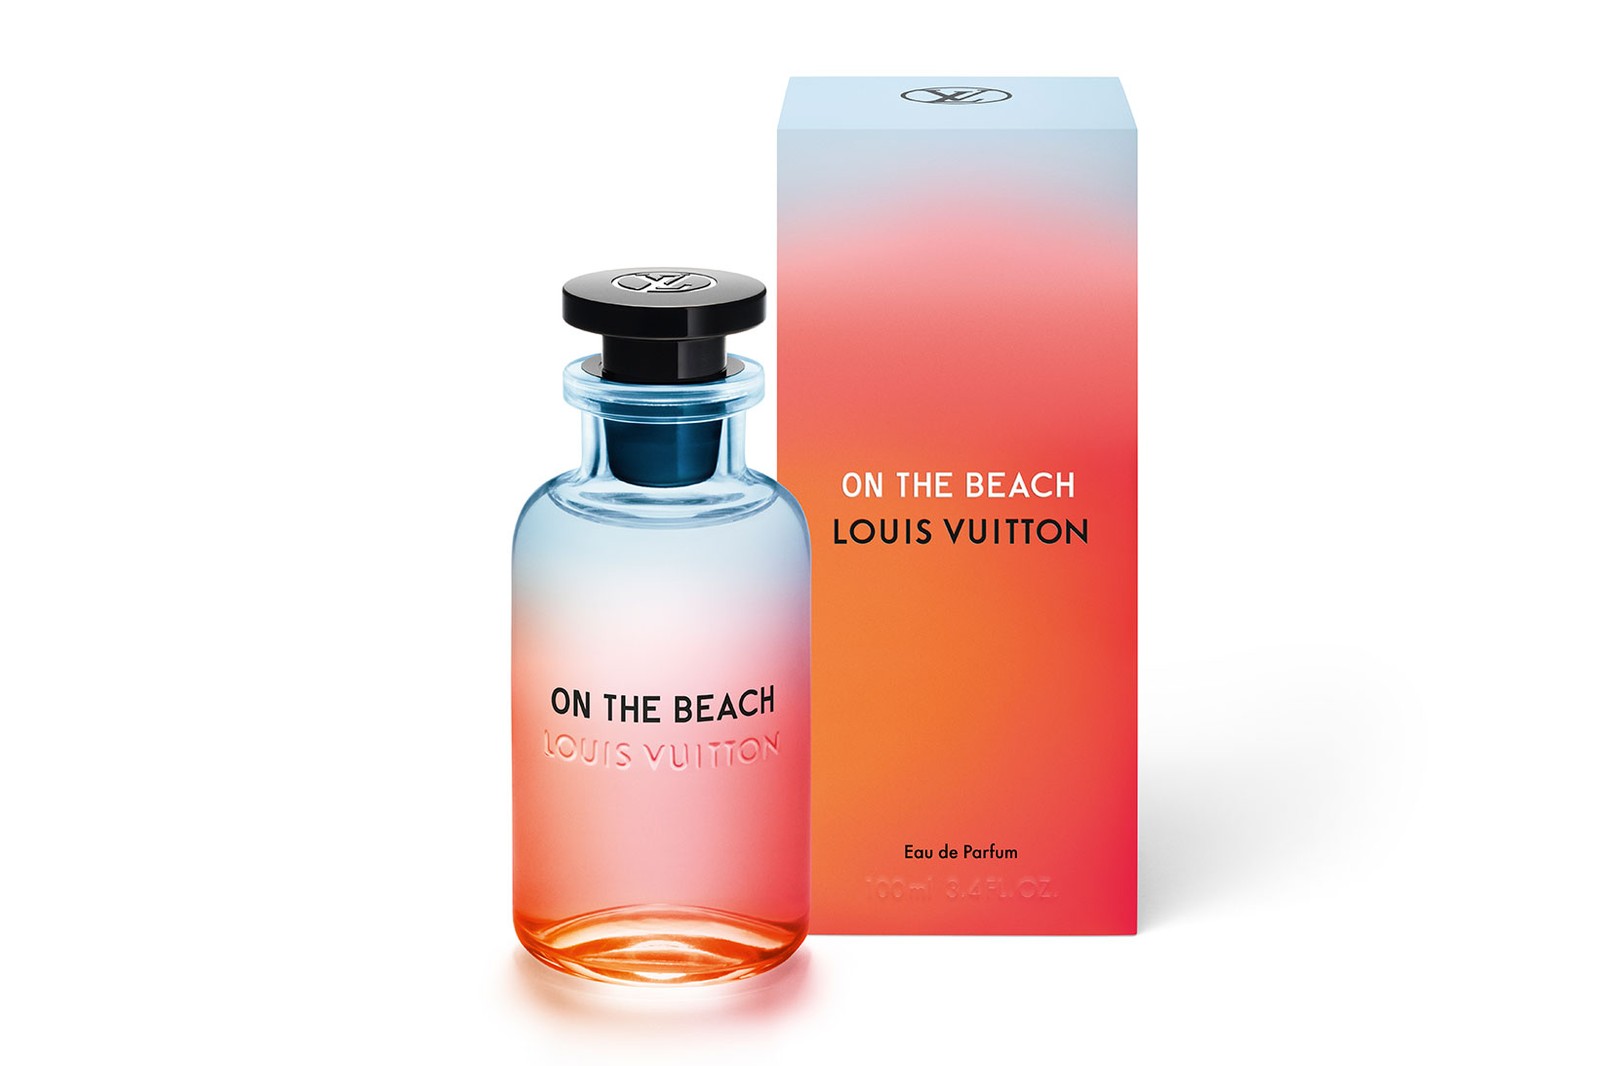 LOUIS VUITTON ON THE BEACH PERFUME UNBOXING + REVIEW 